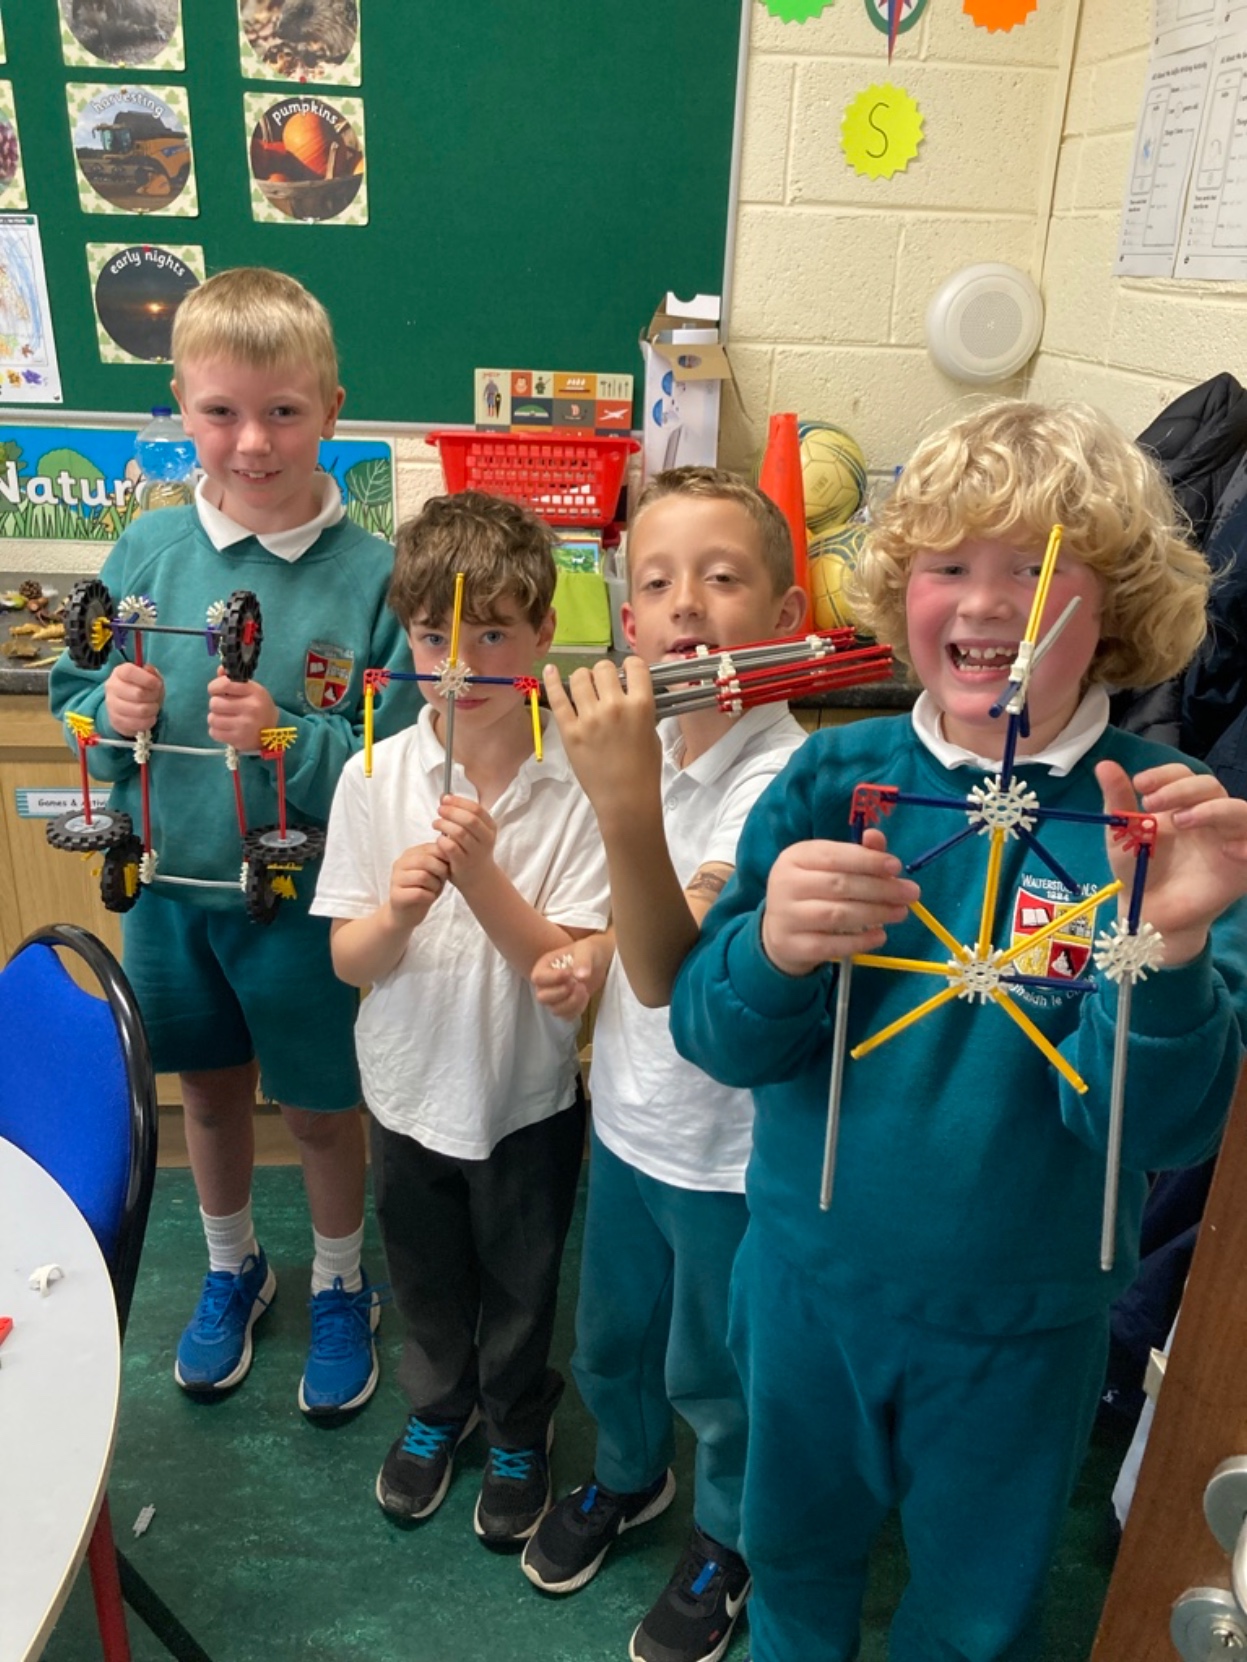 lego and K'nex creations - 2nd Class 2022/23